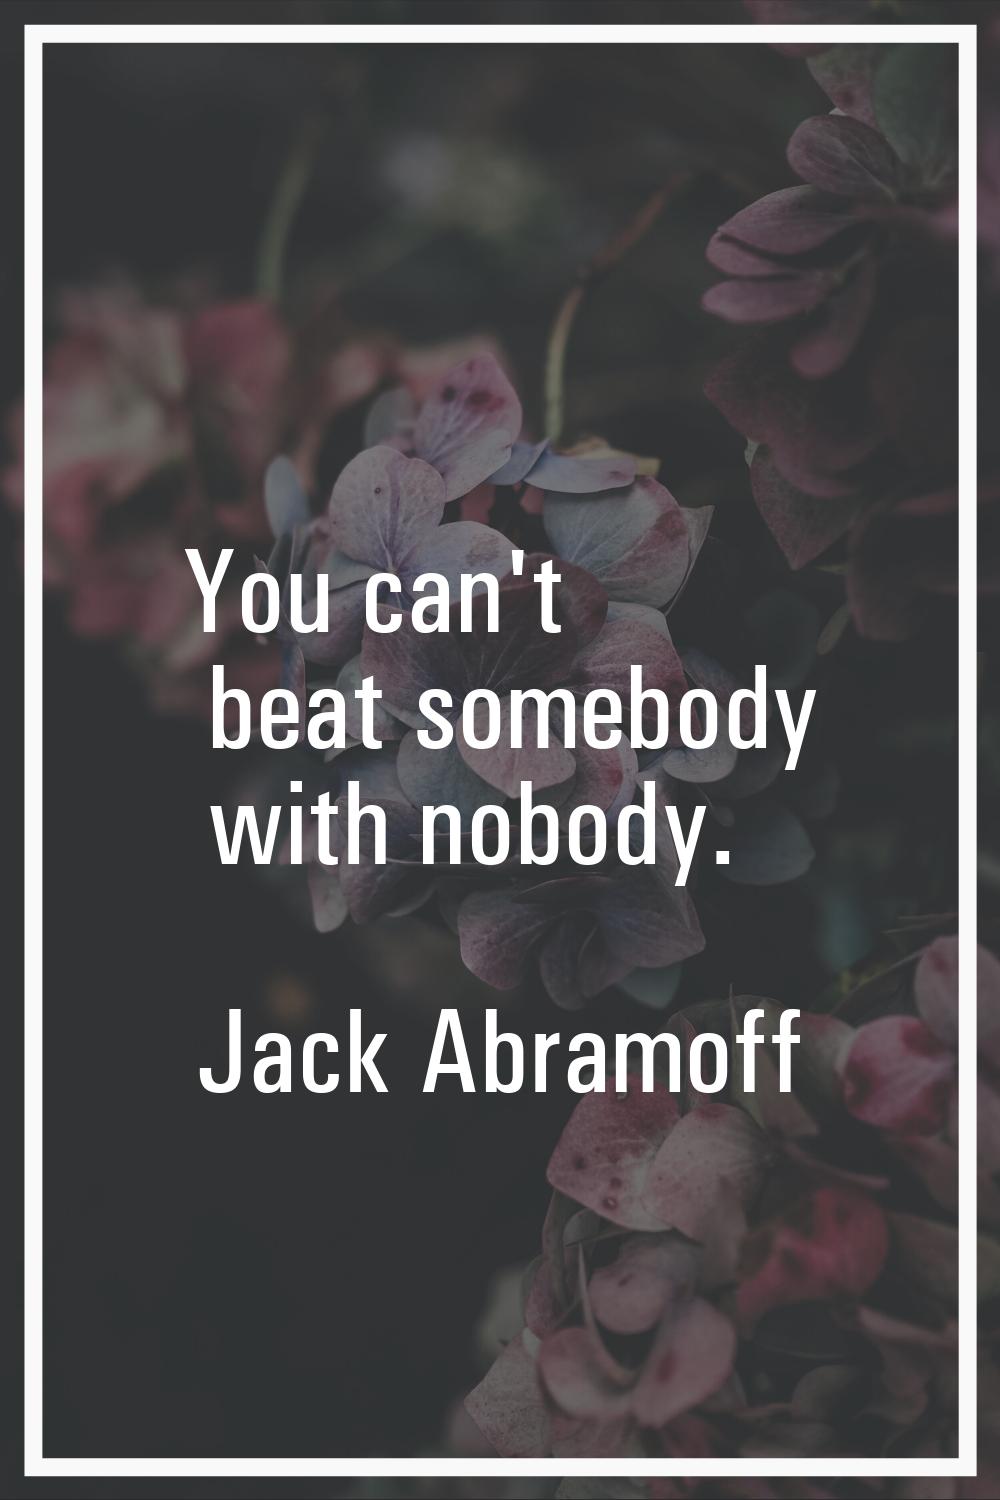 You can't beat somebody with nobody.